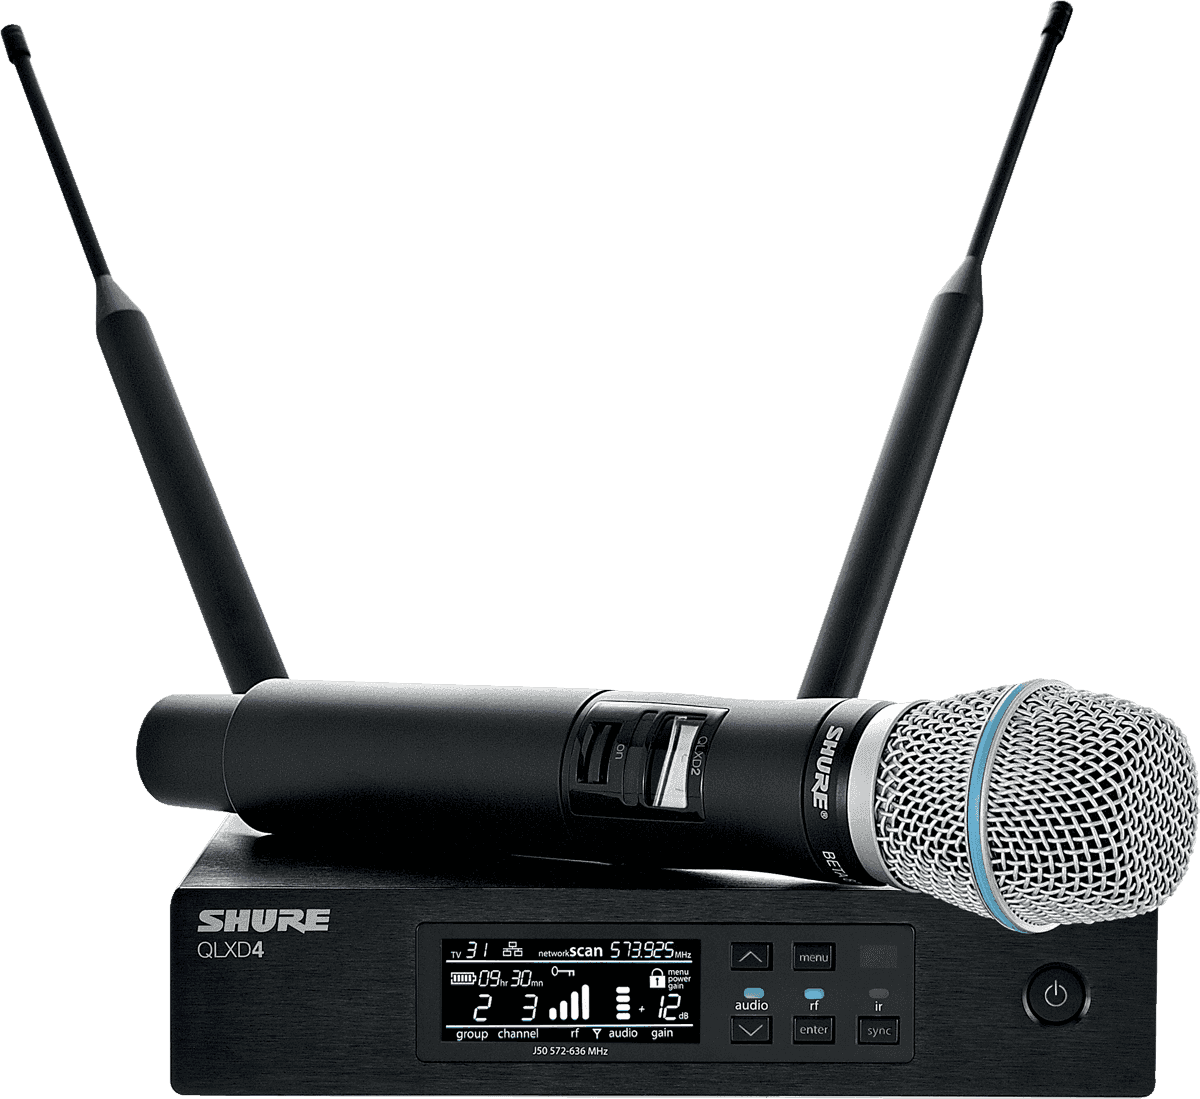 Shure Qlxd24-b87a-h51 - Wireless handheld microphone - Main picture